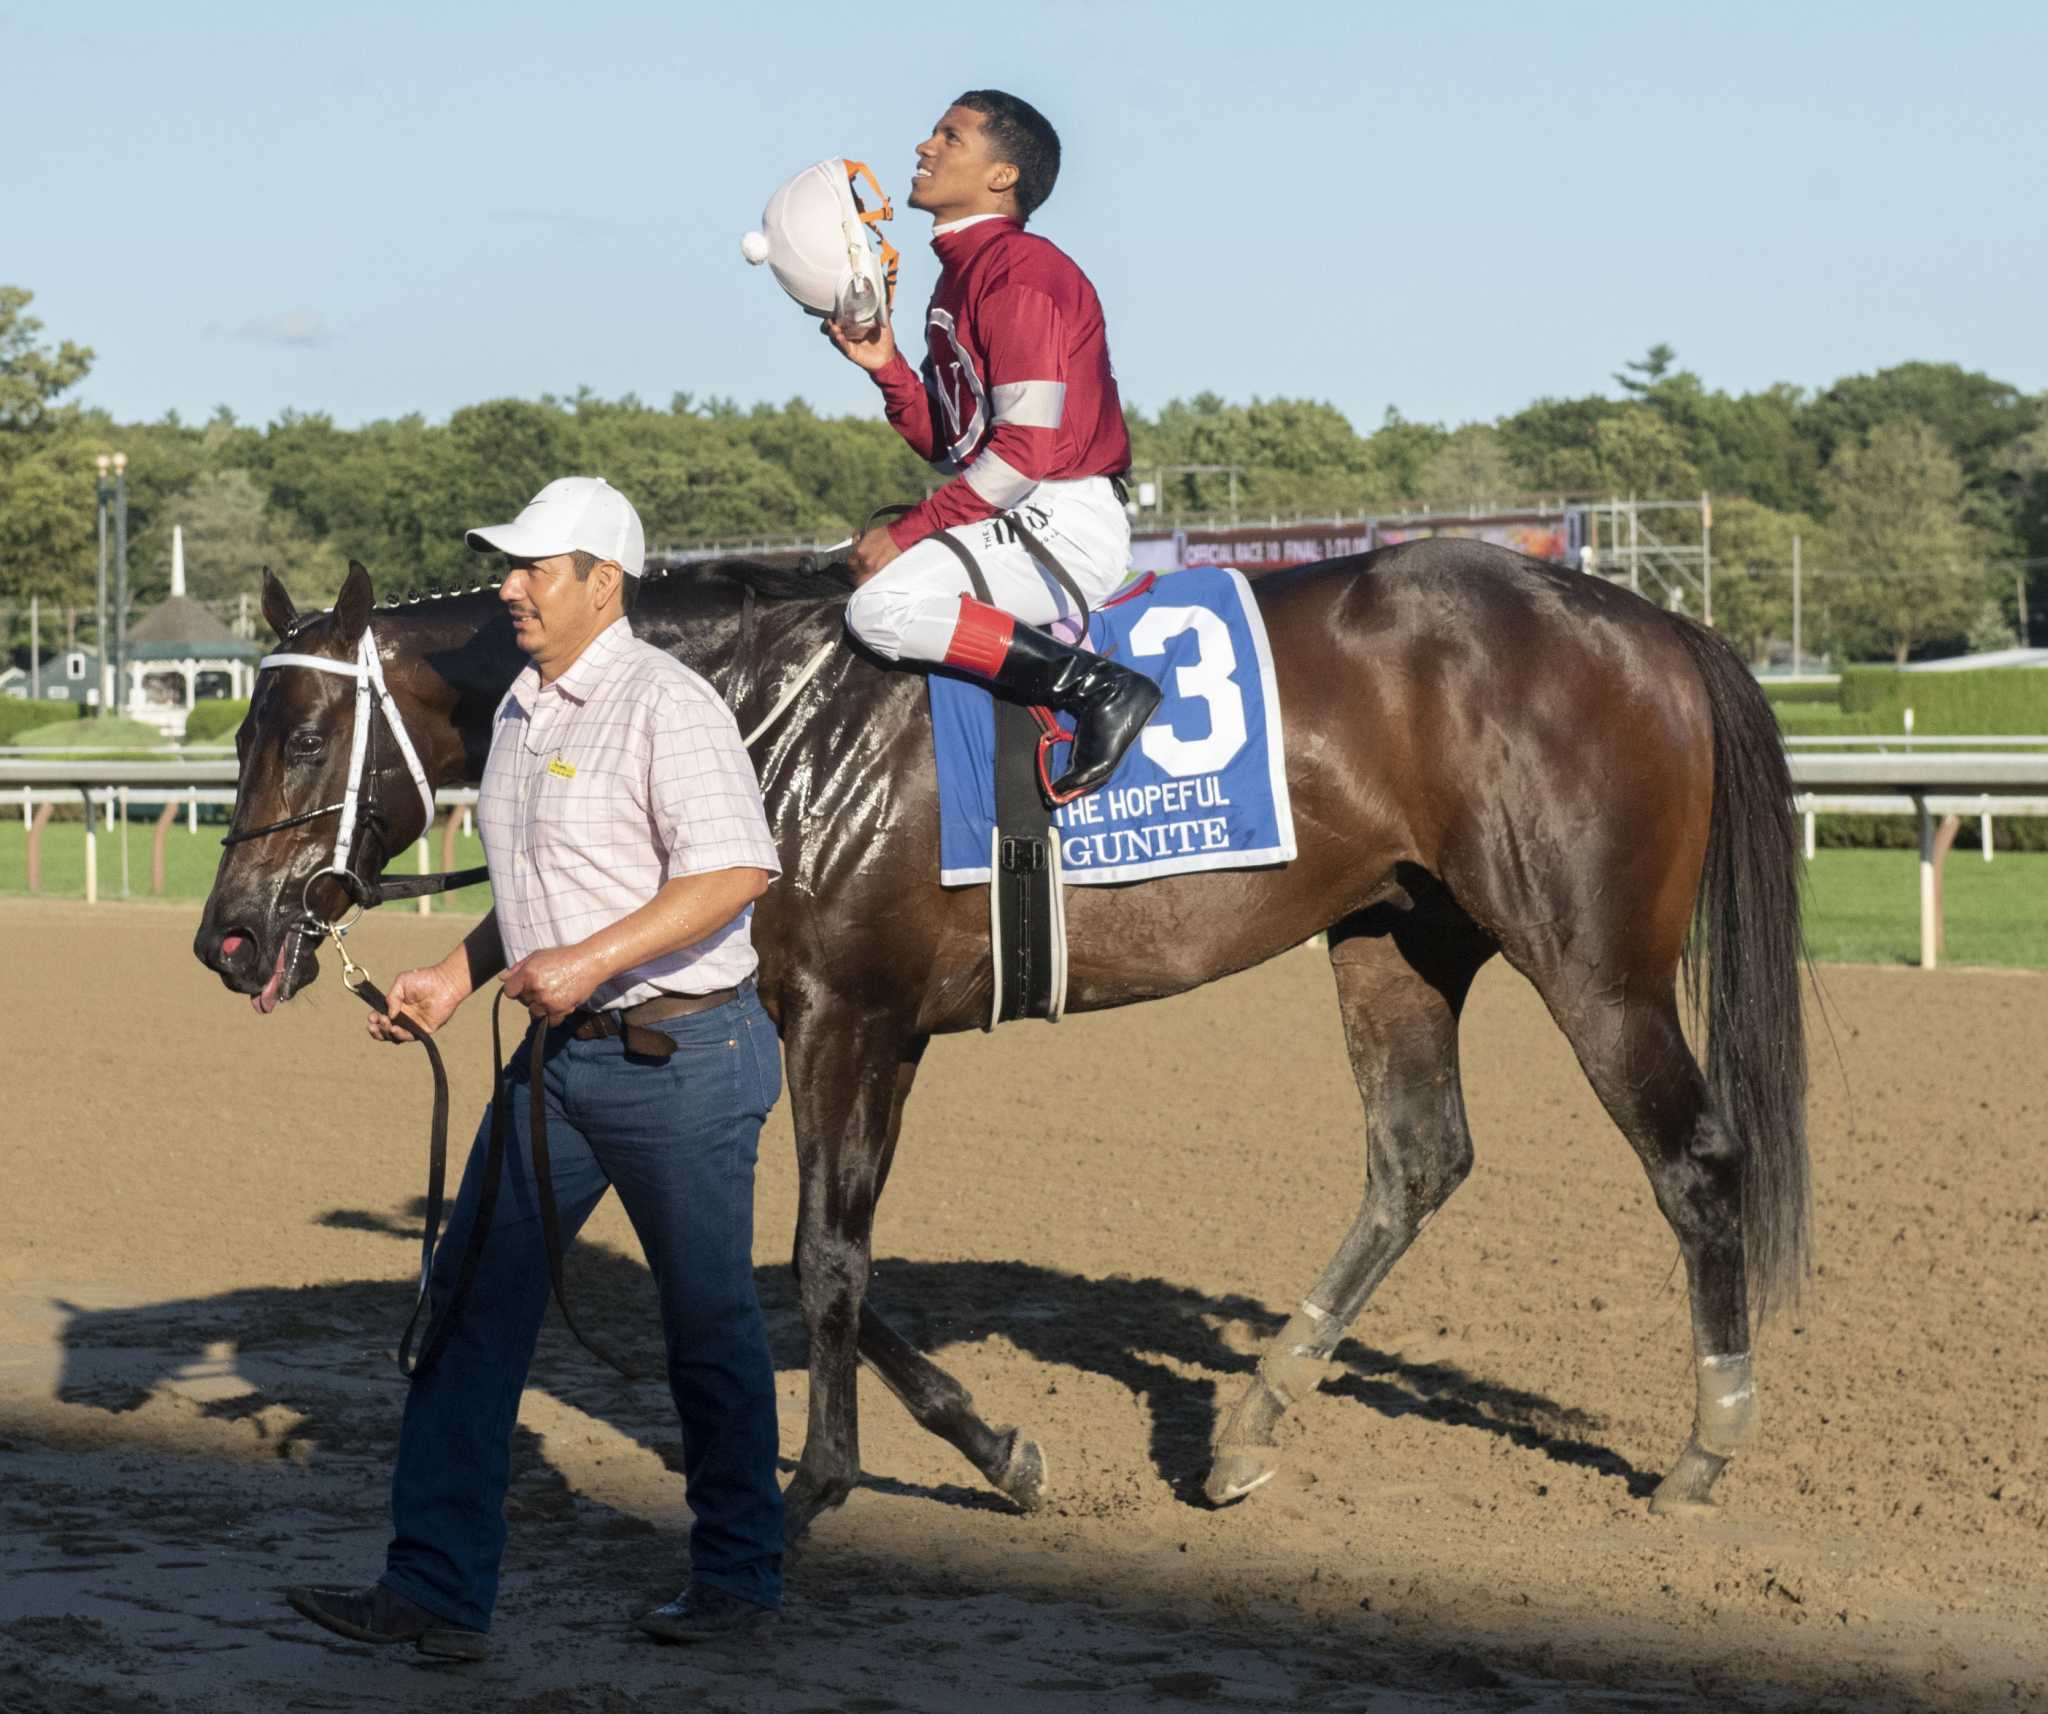 Heavy favorite Wit upset in Hopeful at Saratoga Race Course